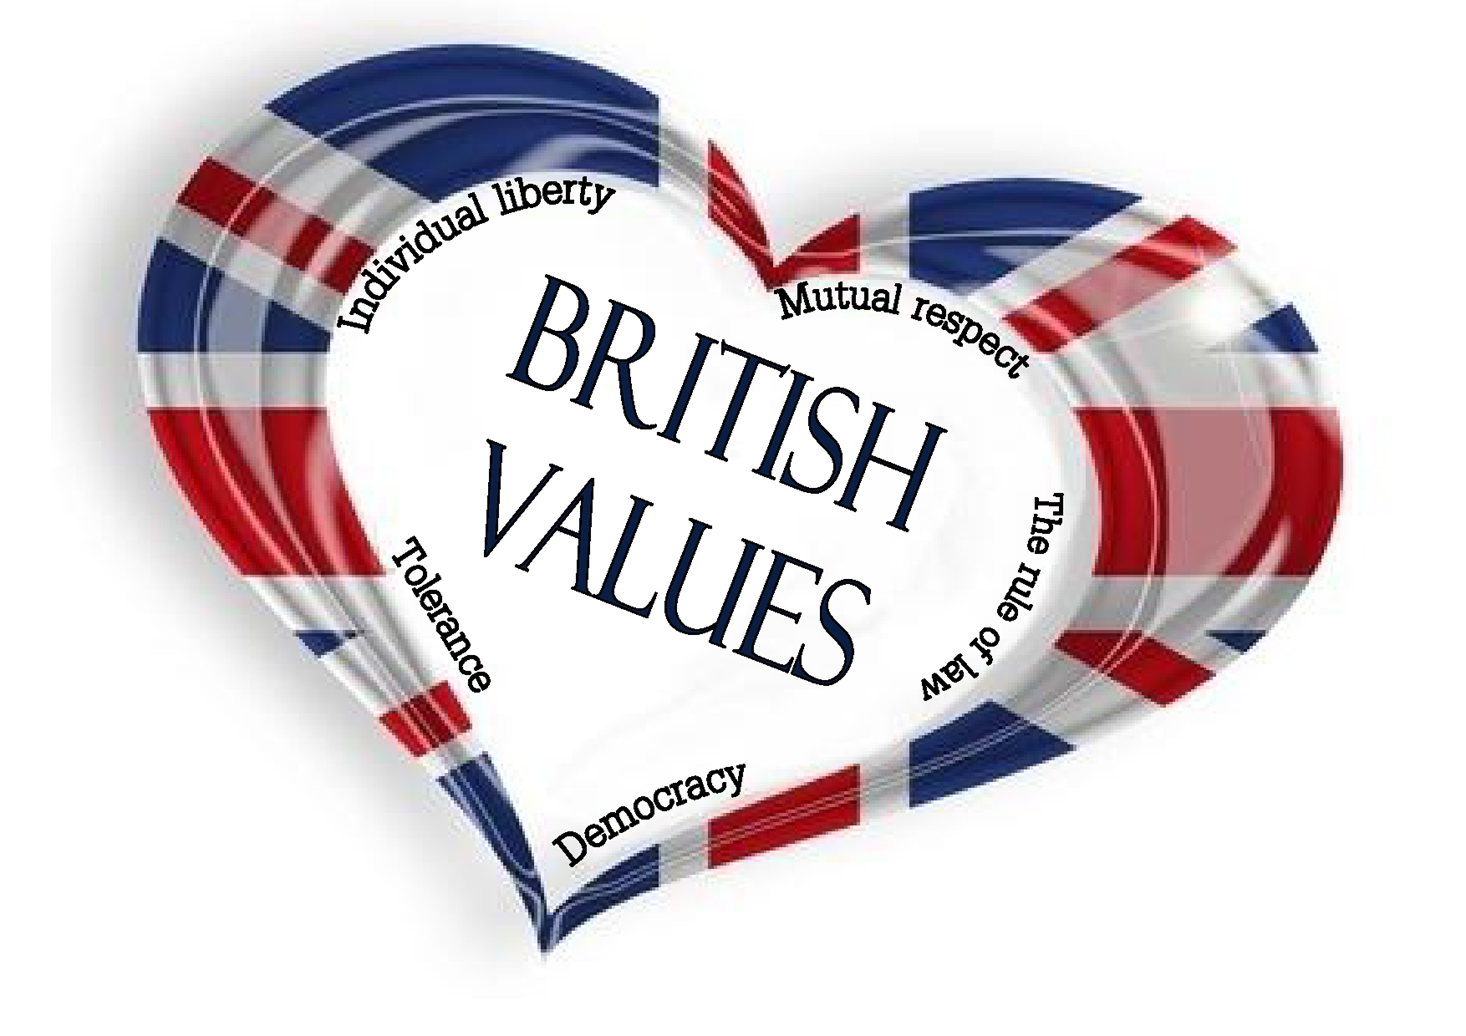 Values topic. British values. The British values are. Values of English people. Value.